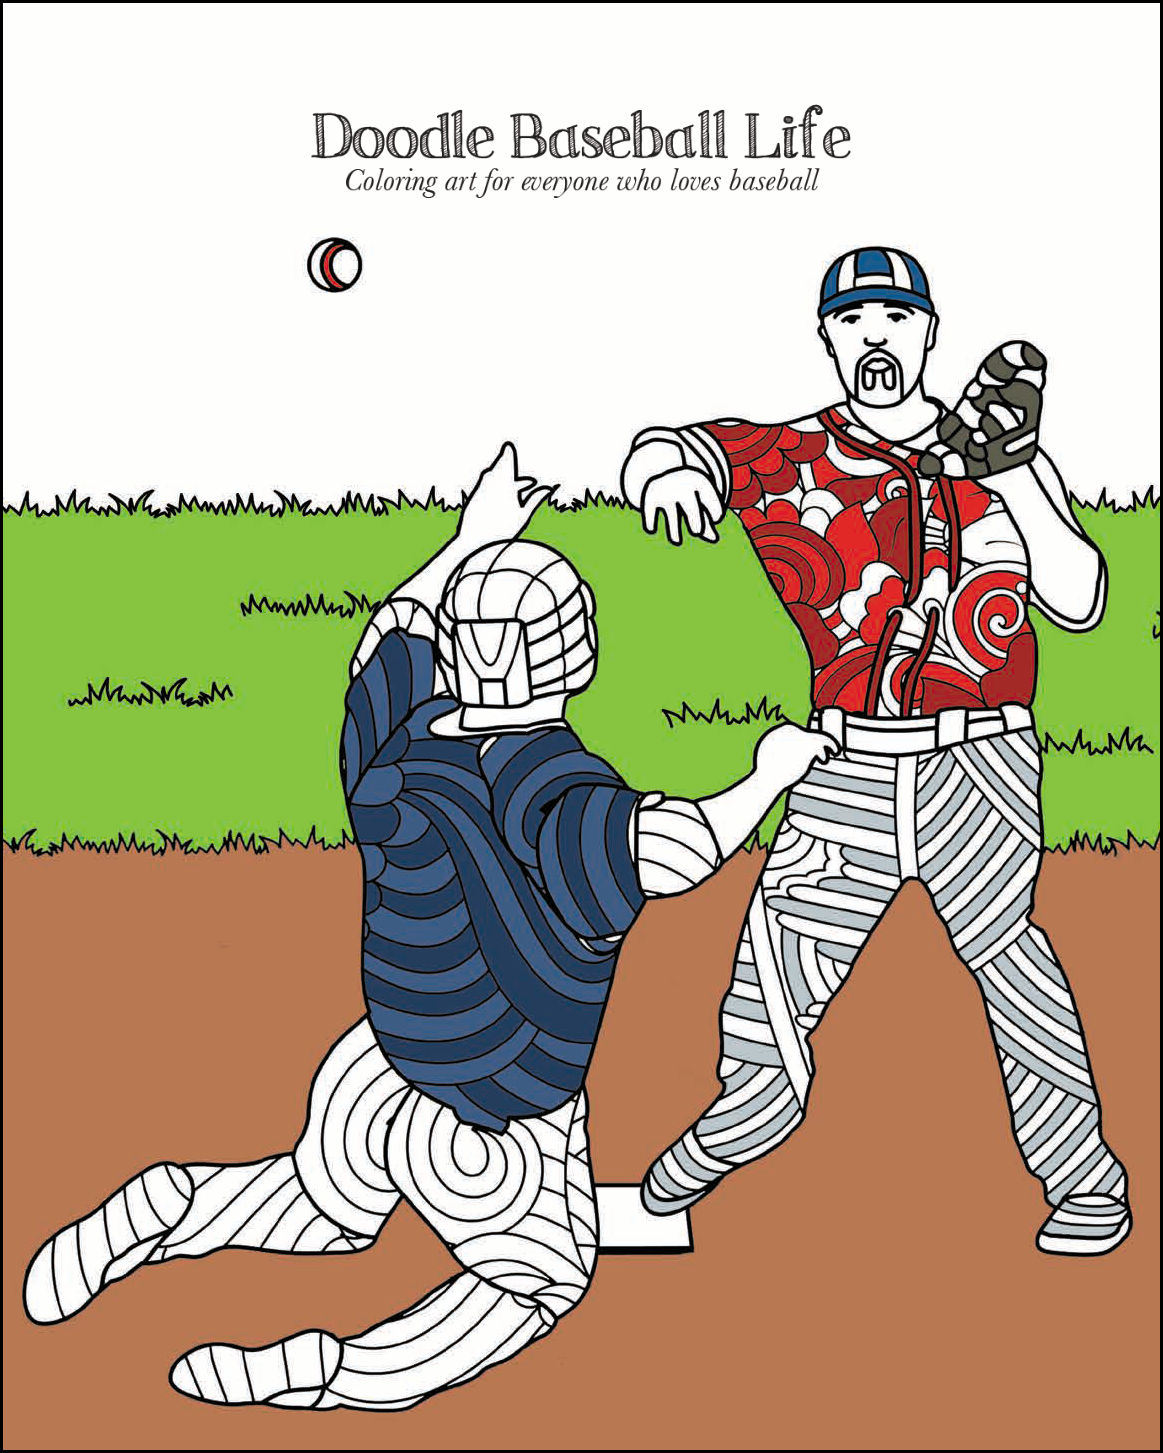 Baseball Jersey Coloring Book: MLB Coloring Book. 60 jerseys (home and  alternate) of all major league teams, ready to color. Ideal gift for  baseball (Paperback)